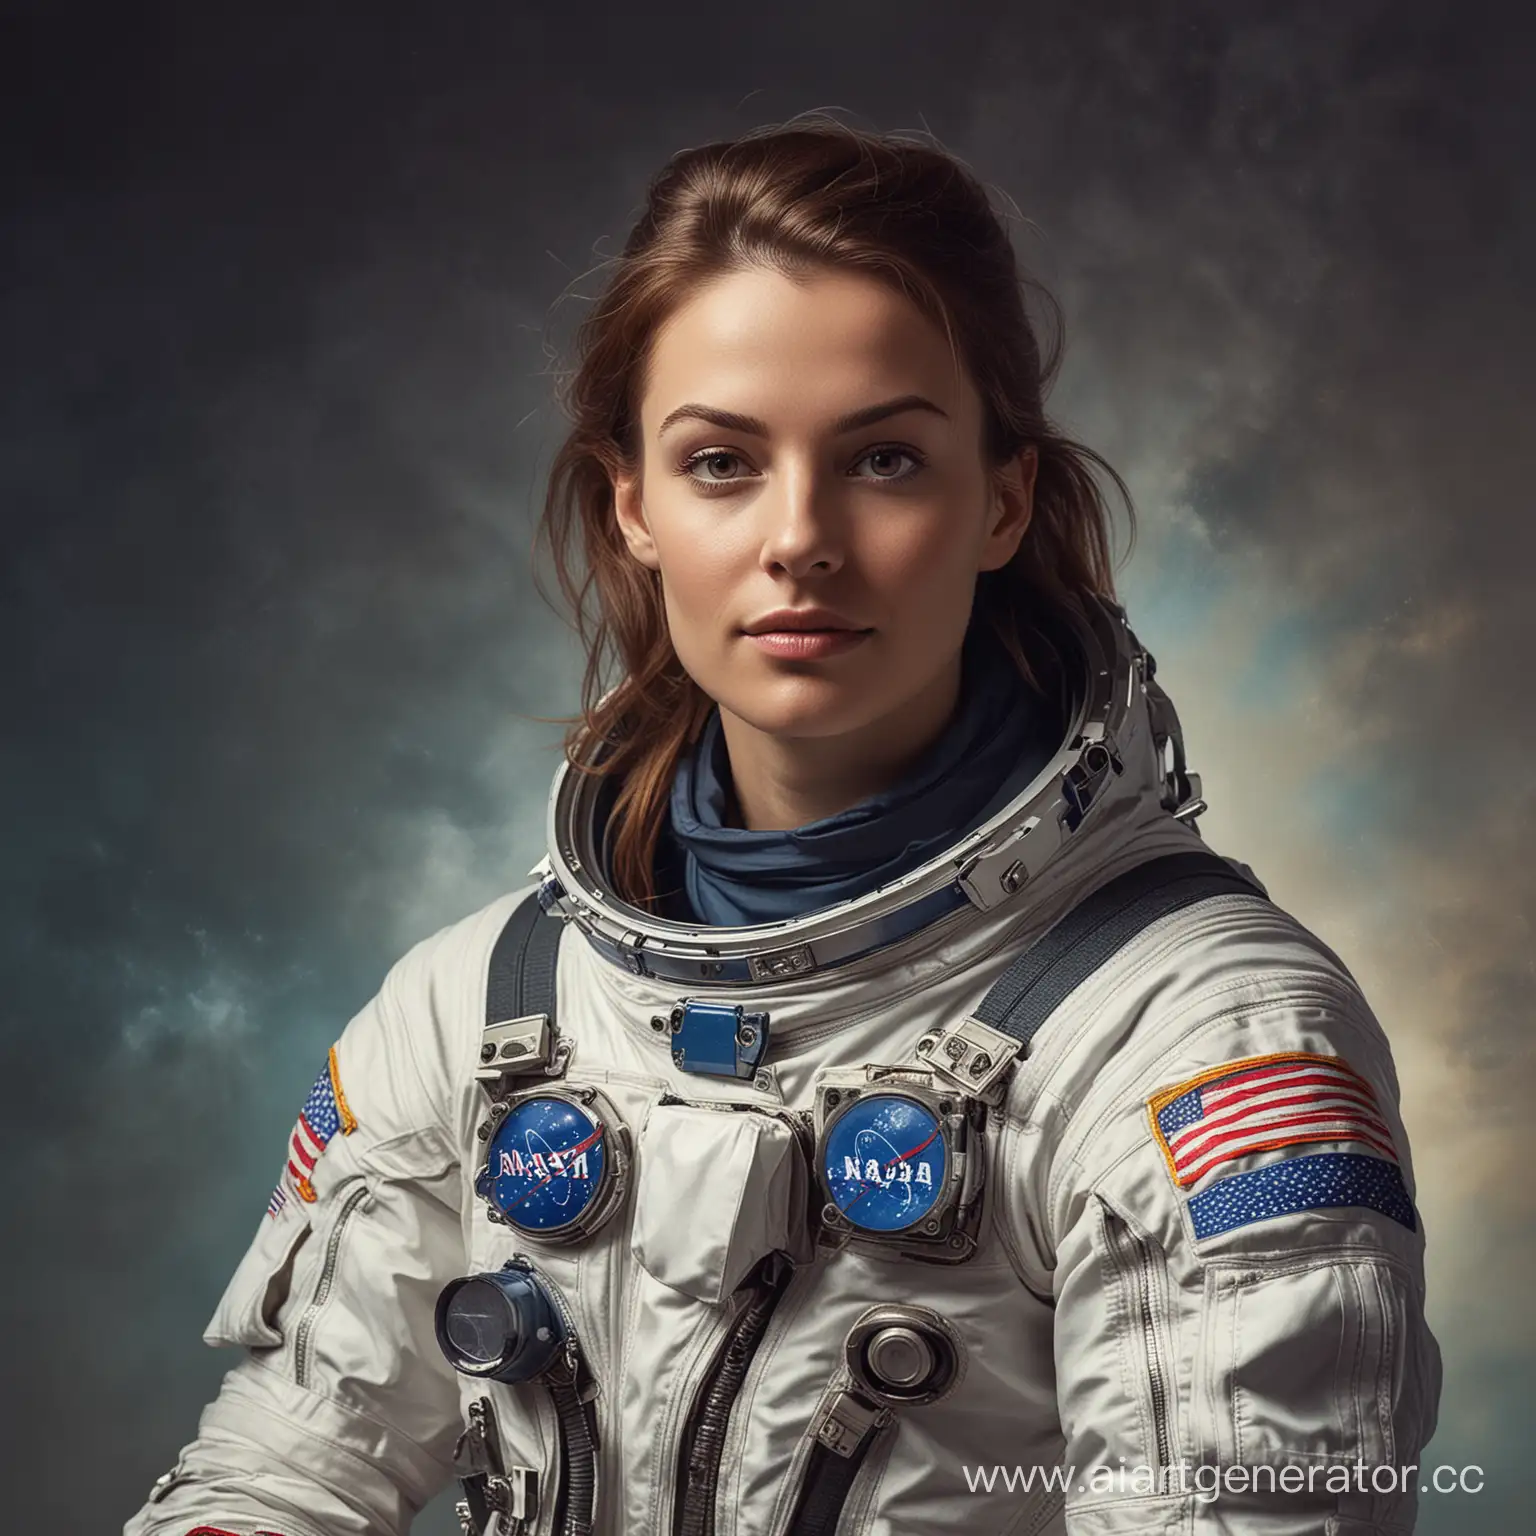 Female-Astronaut-Exploring-Space-Station